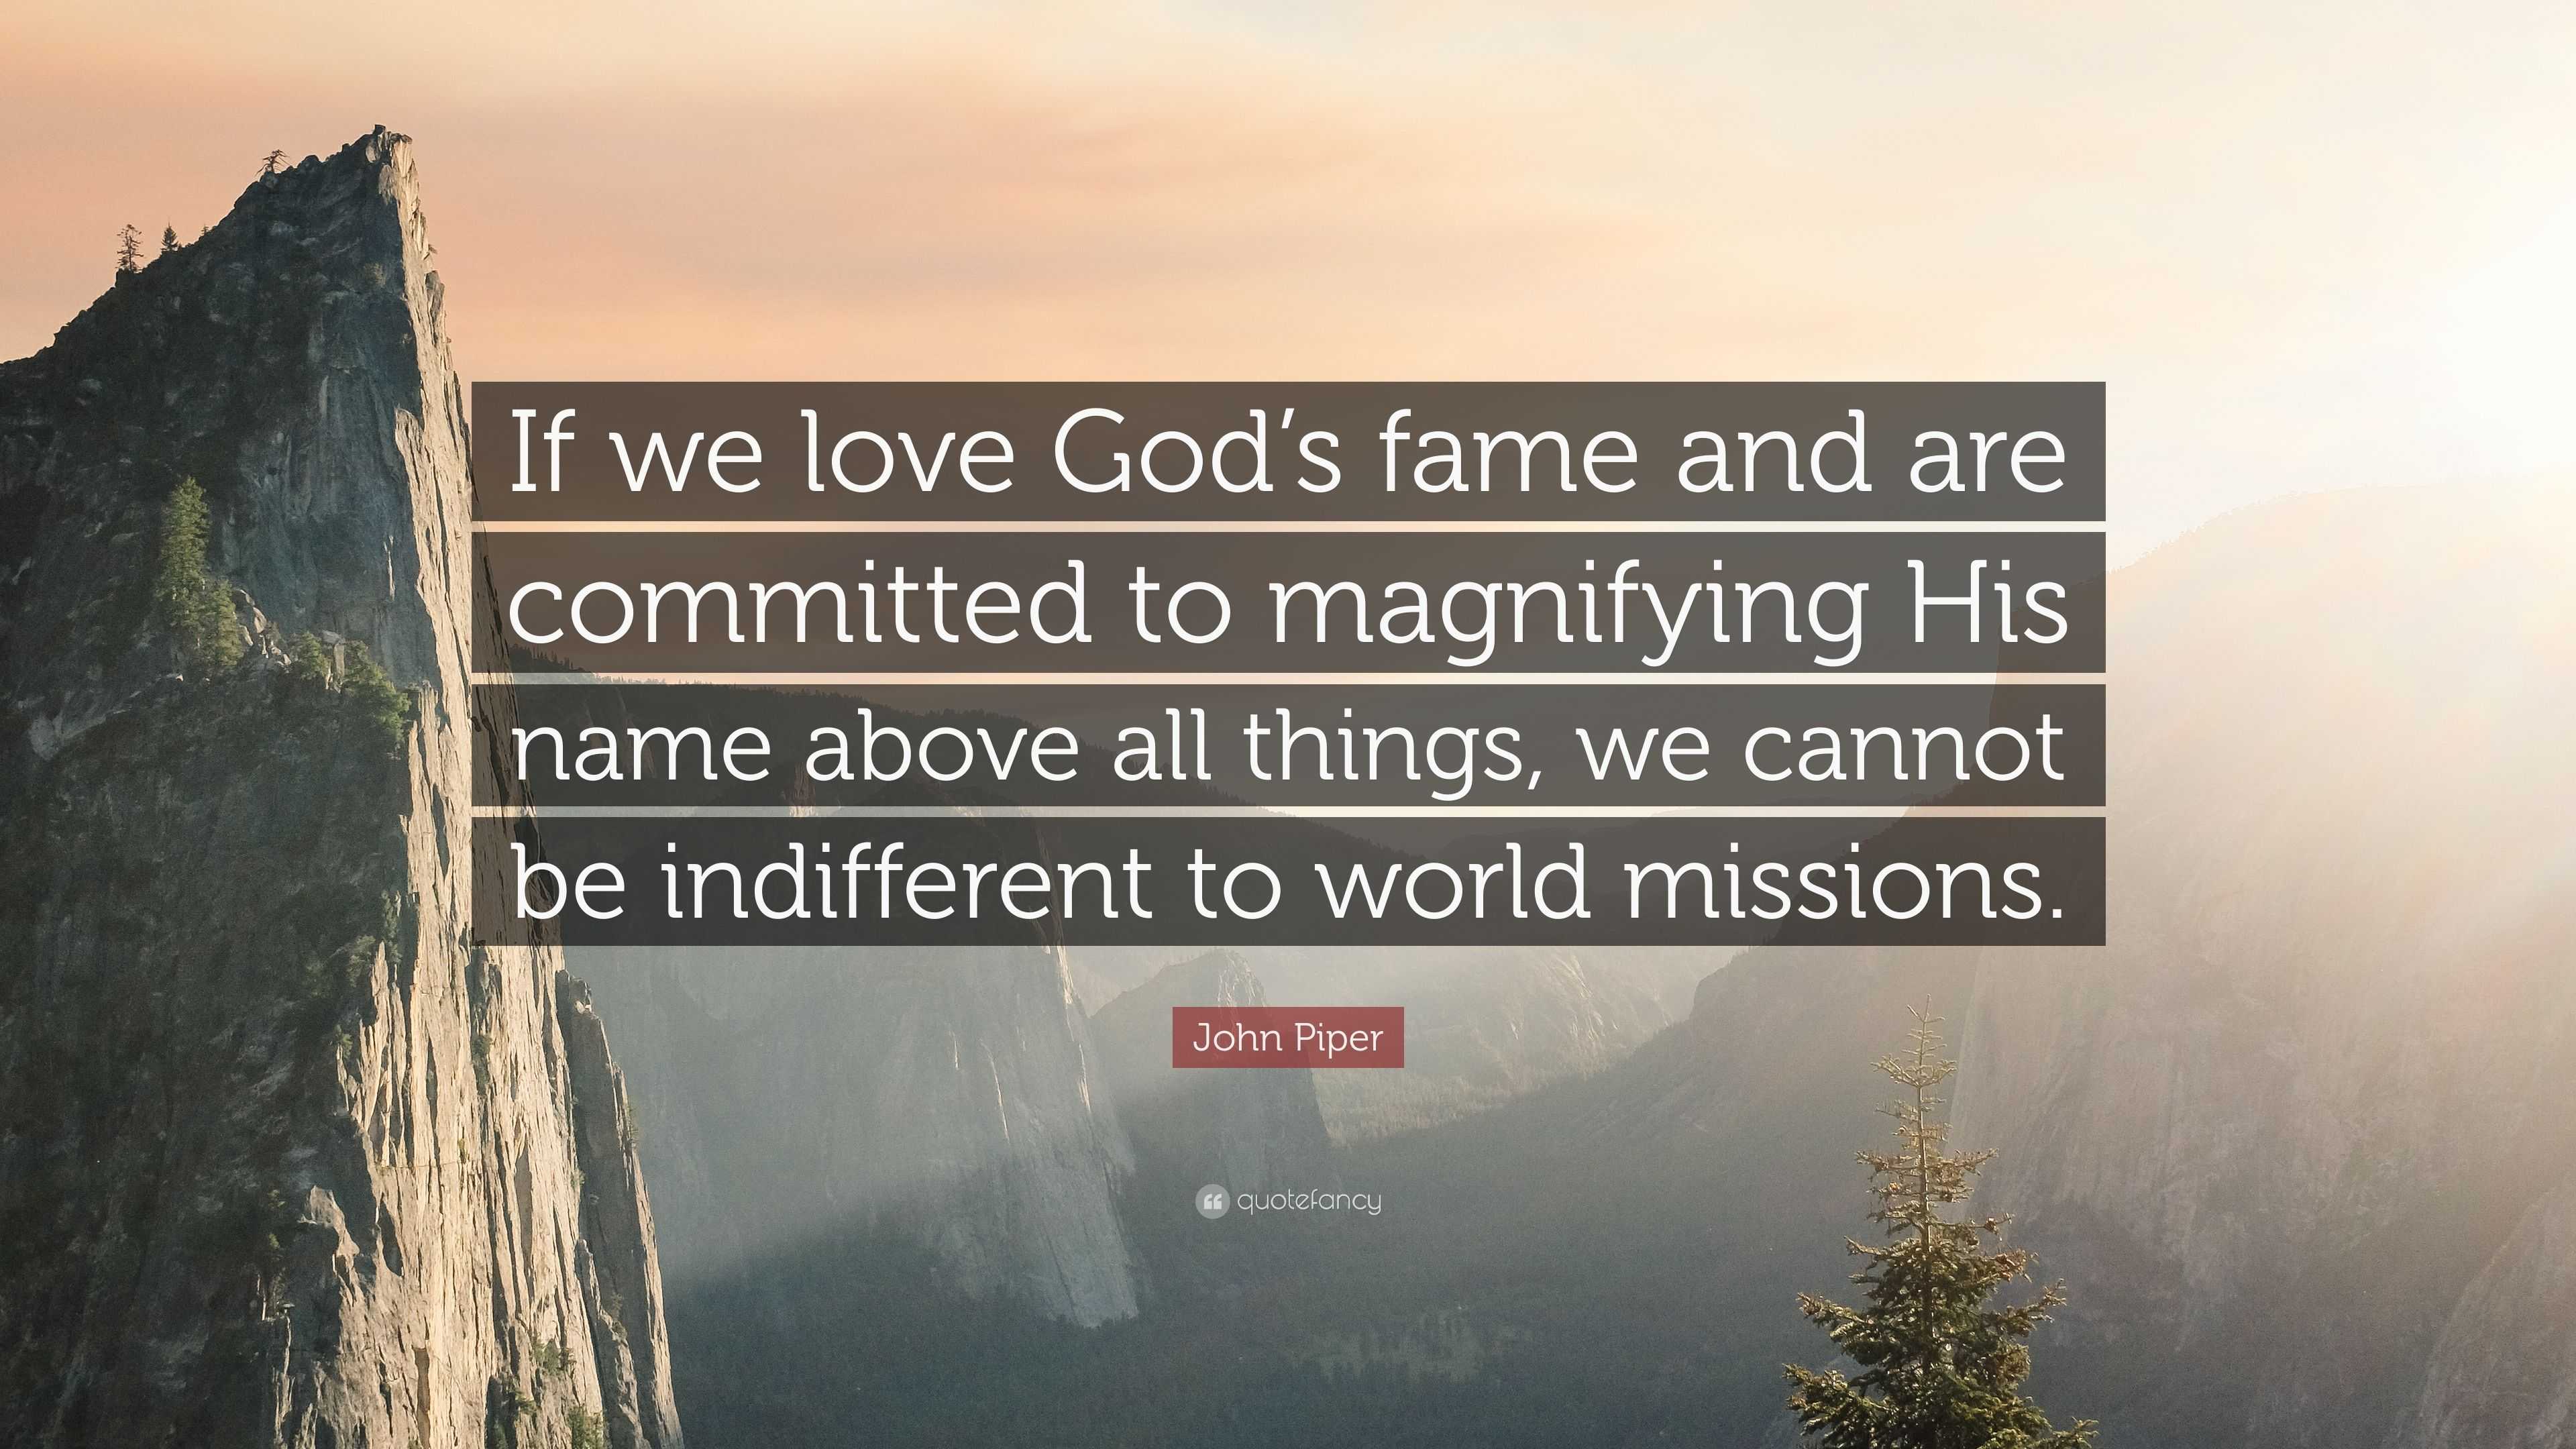 John Piper Quote “If we love God s fame and are mitted to magnifying His